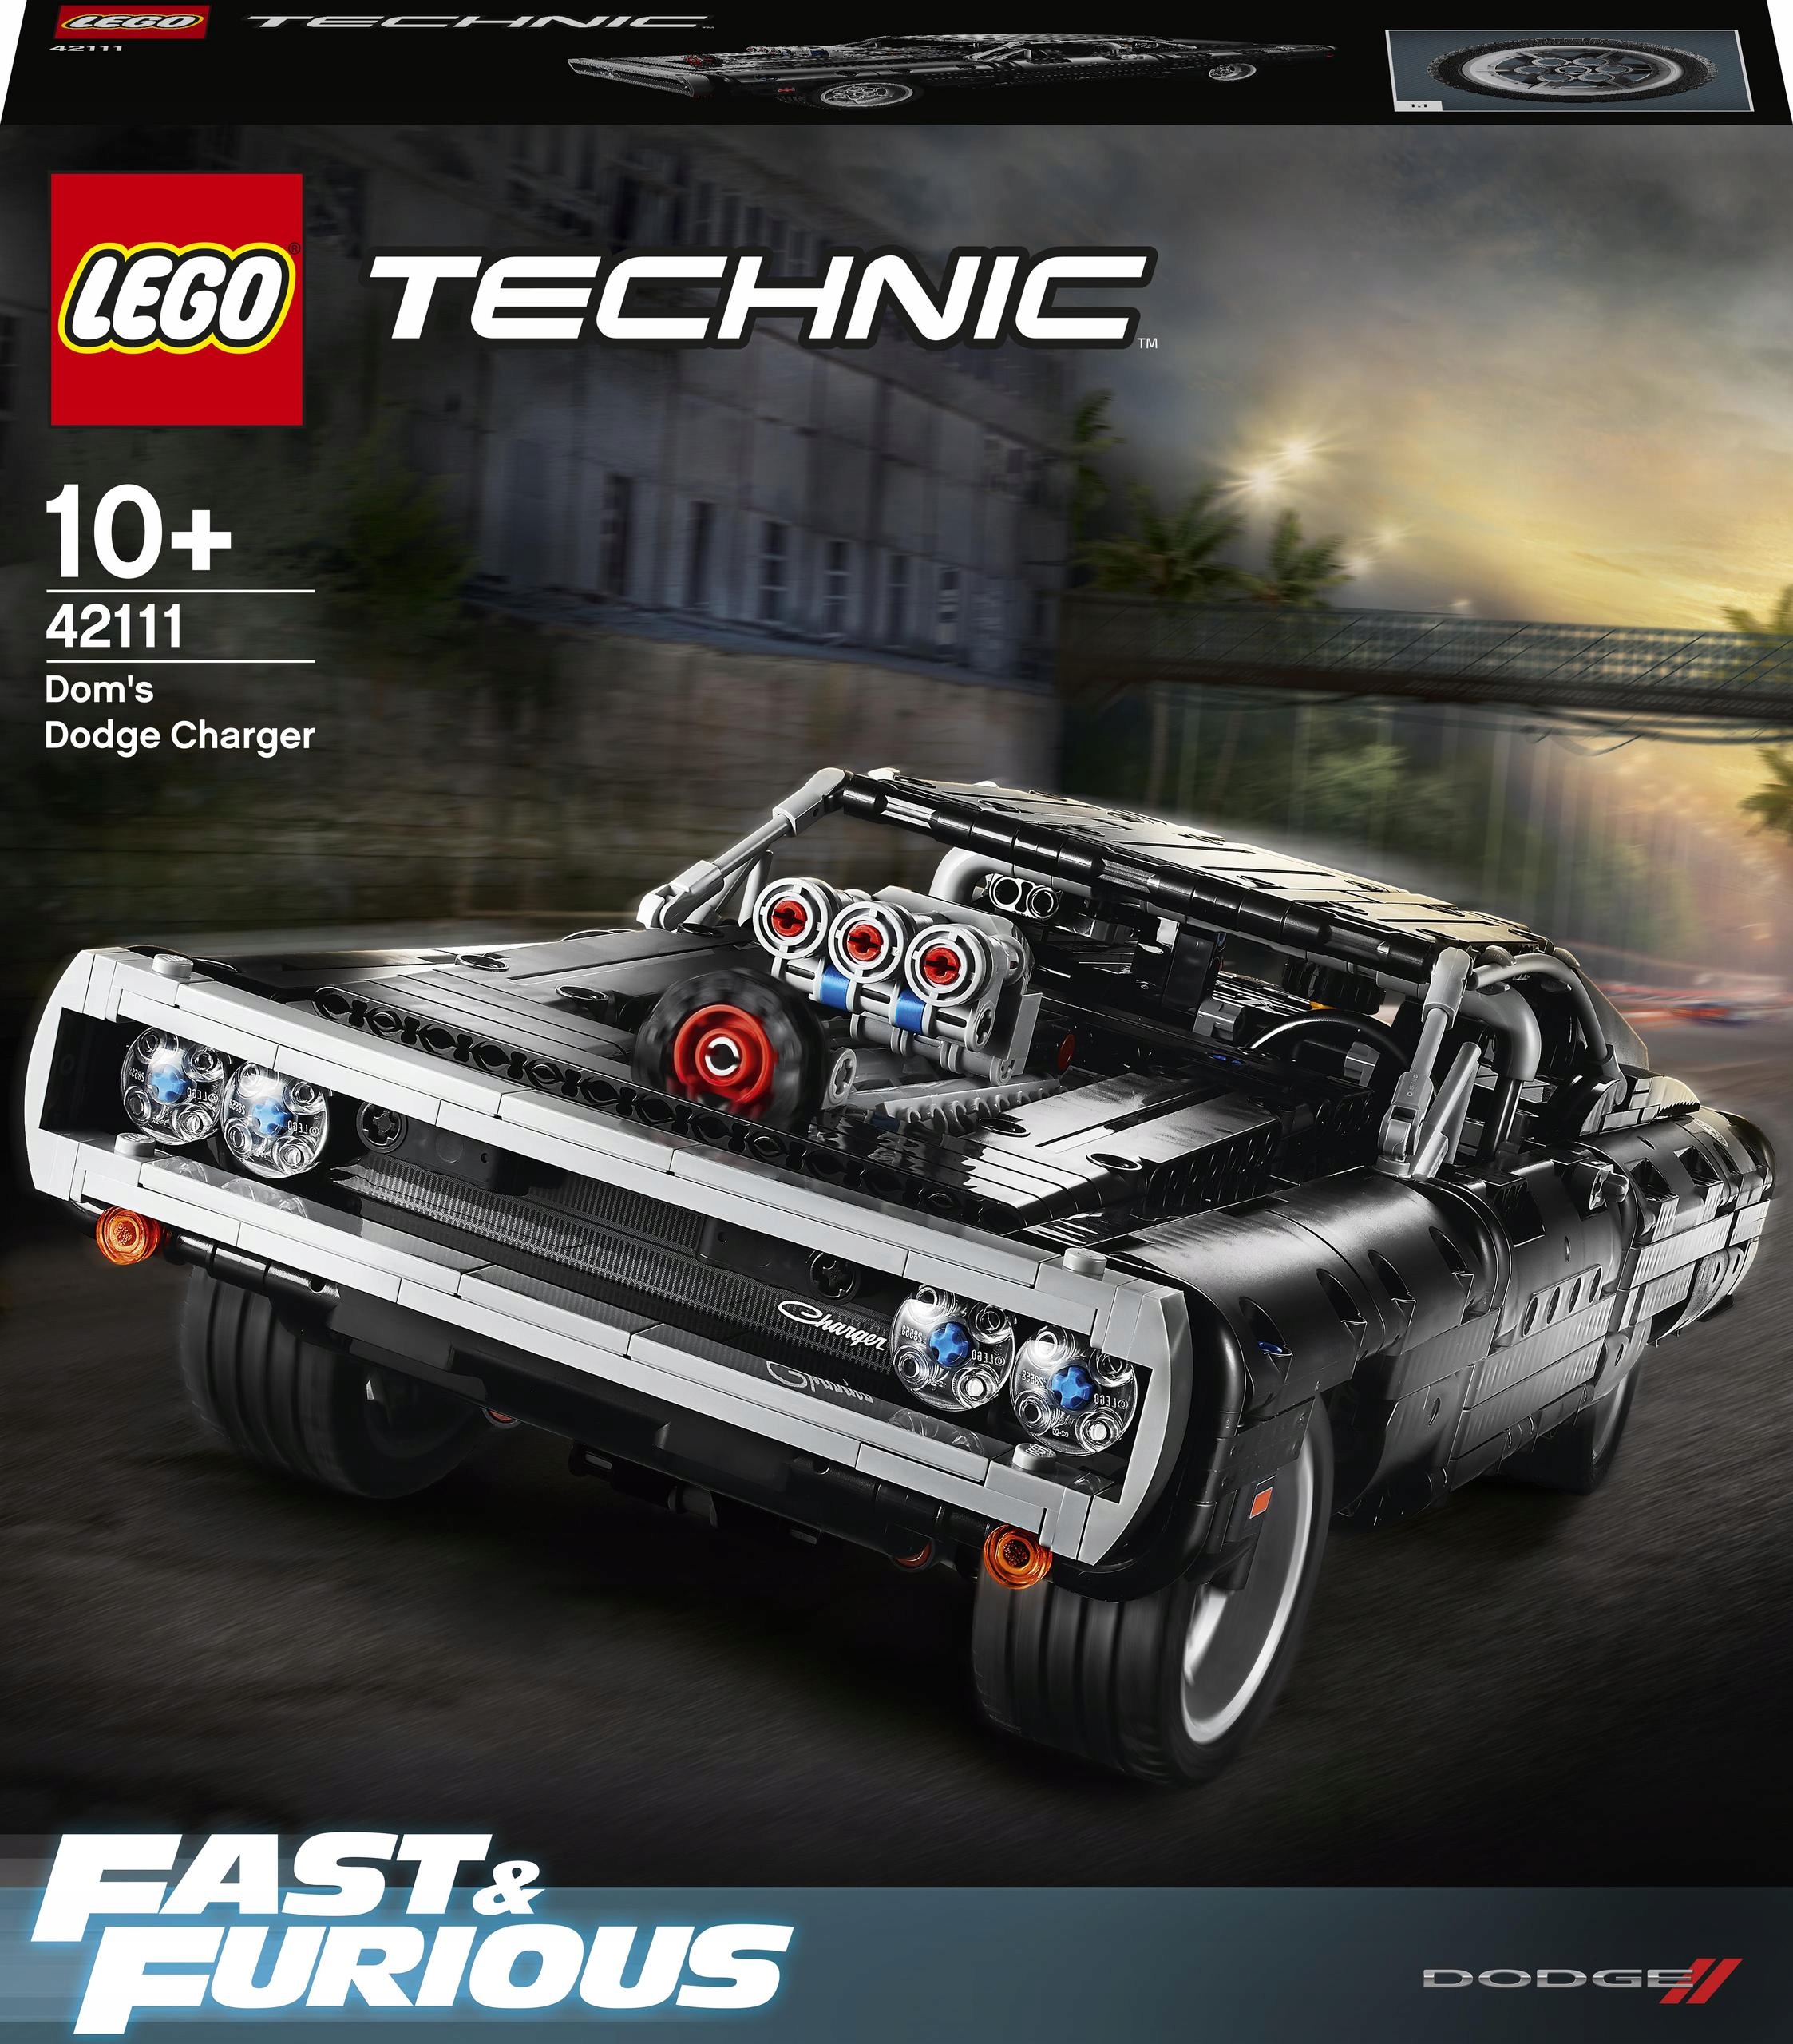 Dodge Charger LEGO Technic Dodge Charger 42111